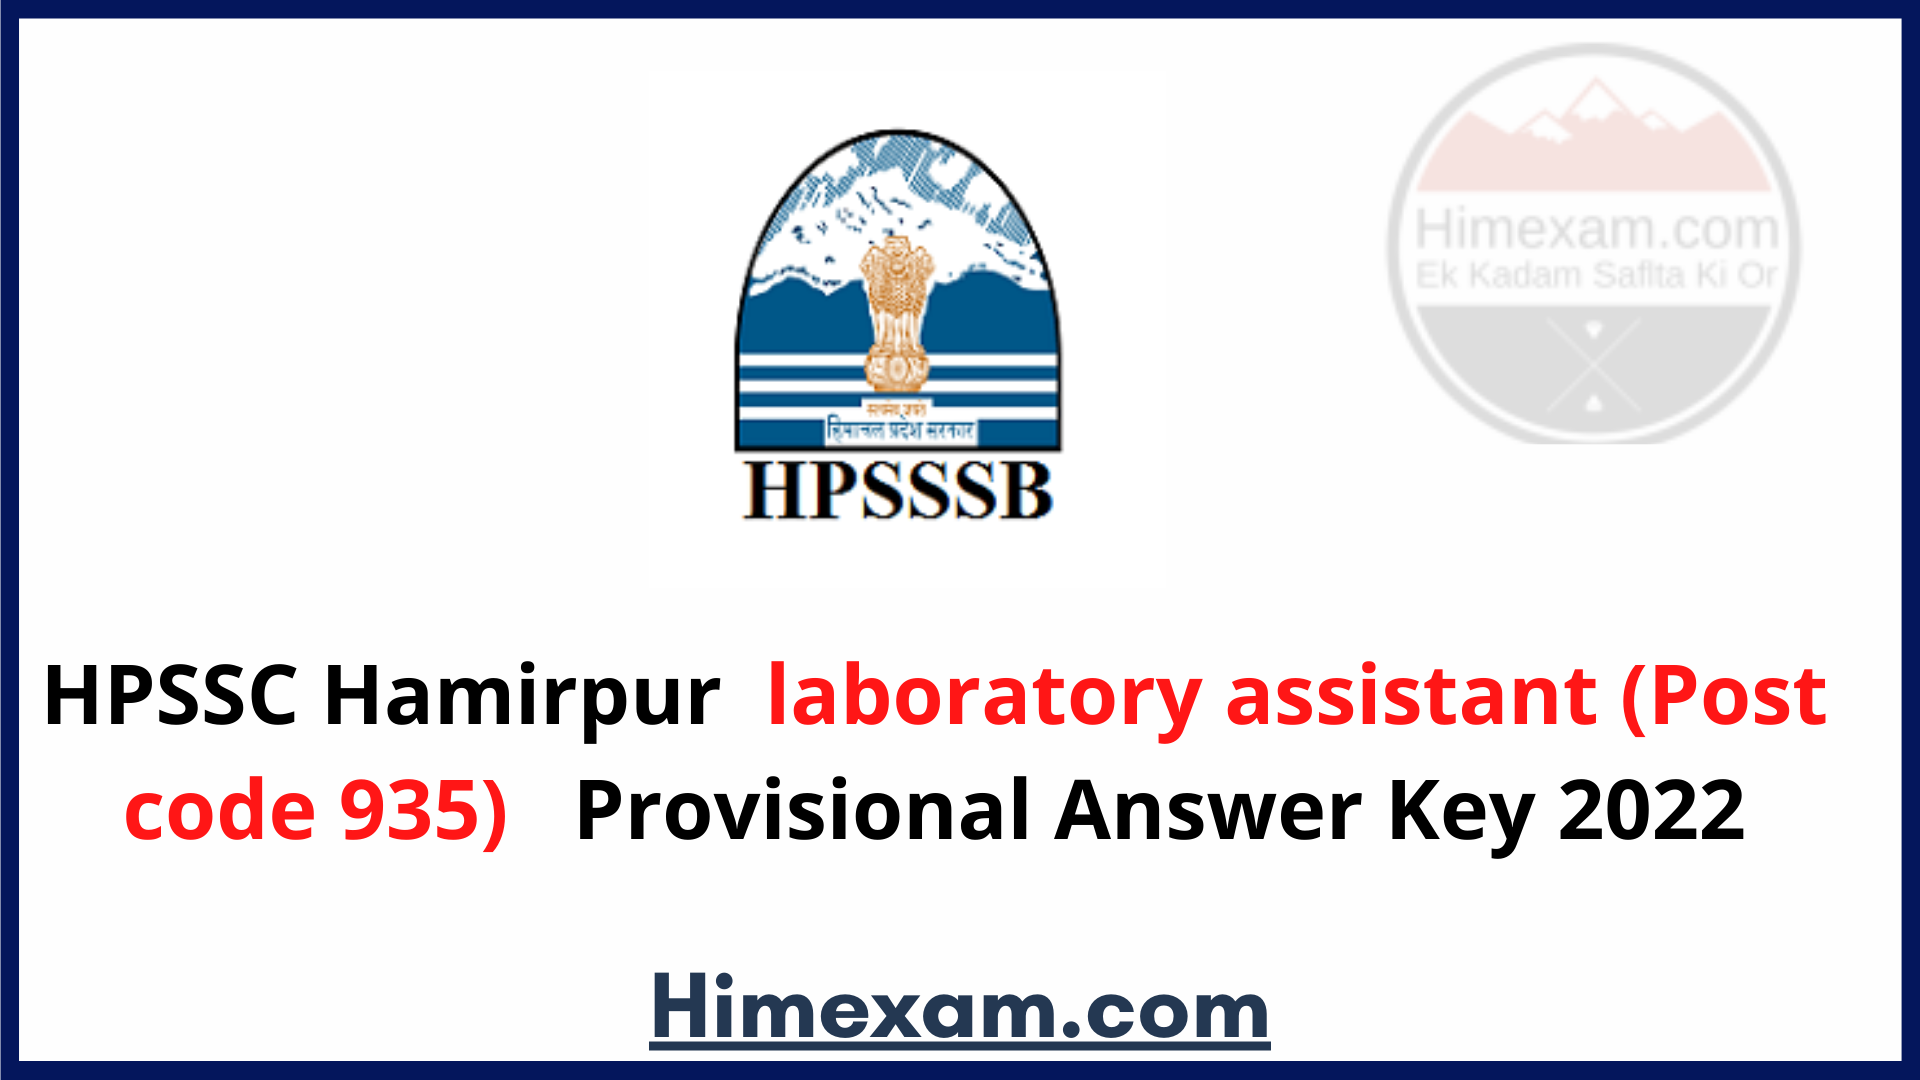 HPSSC Hamirpur   laboratory assistant (Post code 935)   Provisional Answer Key 2022